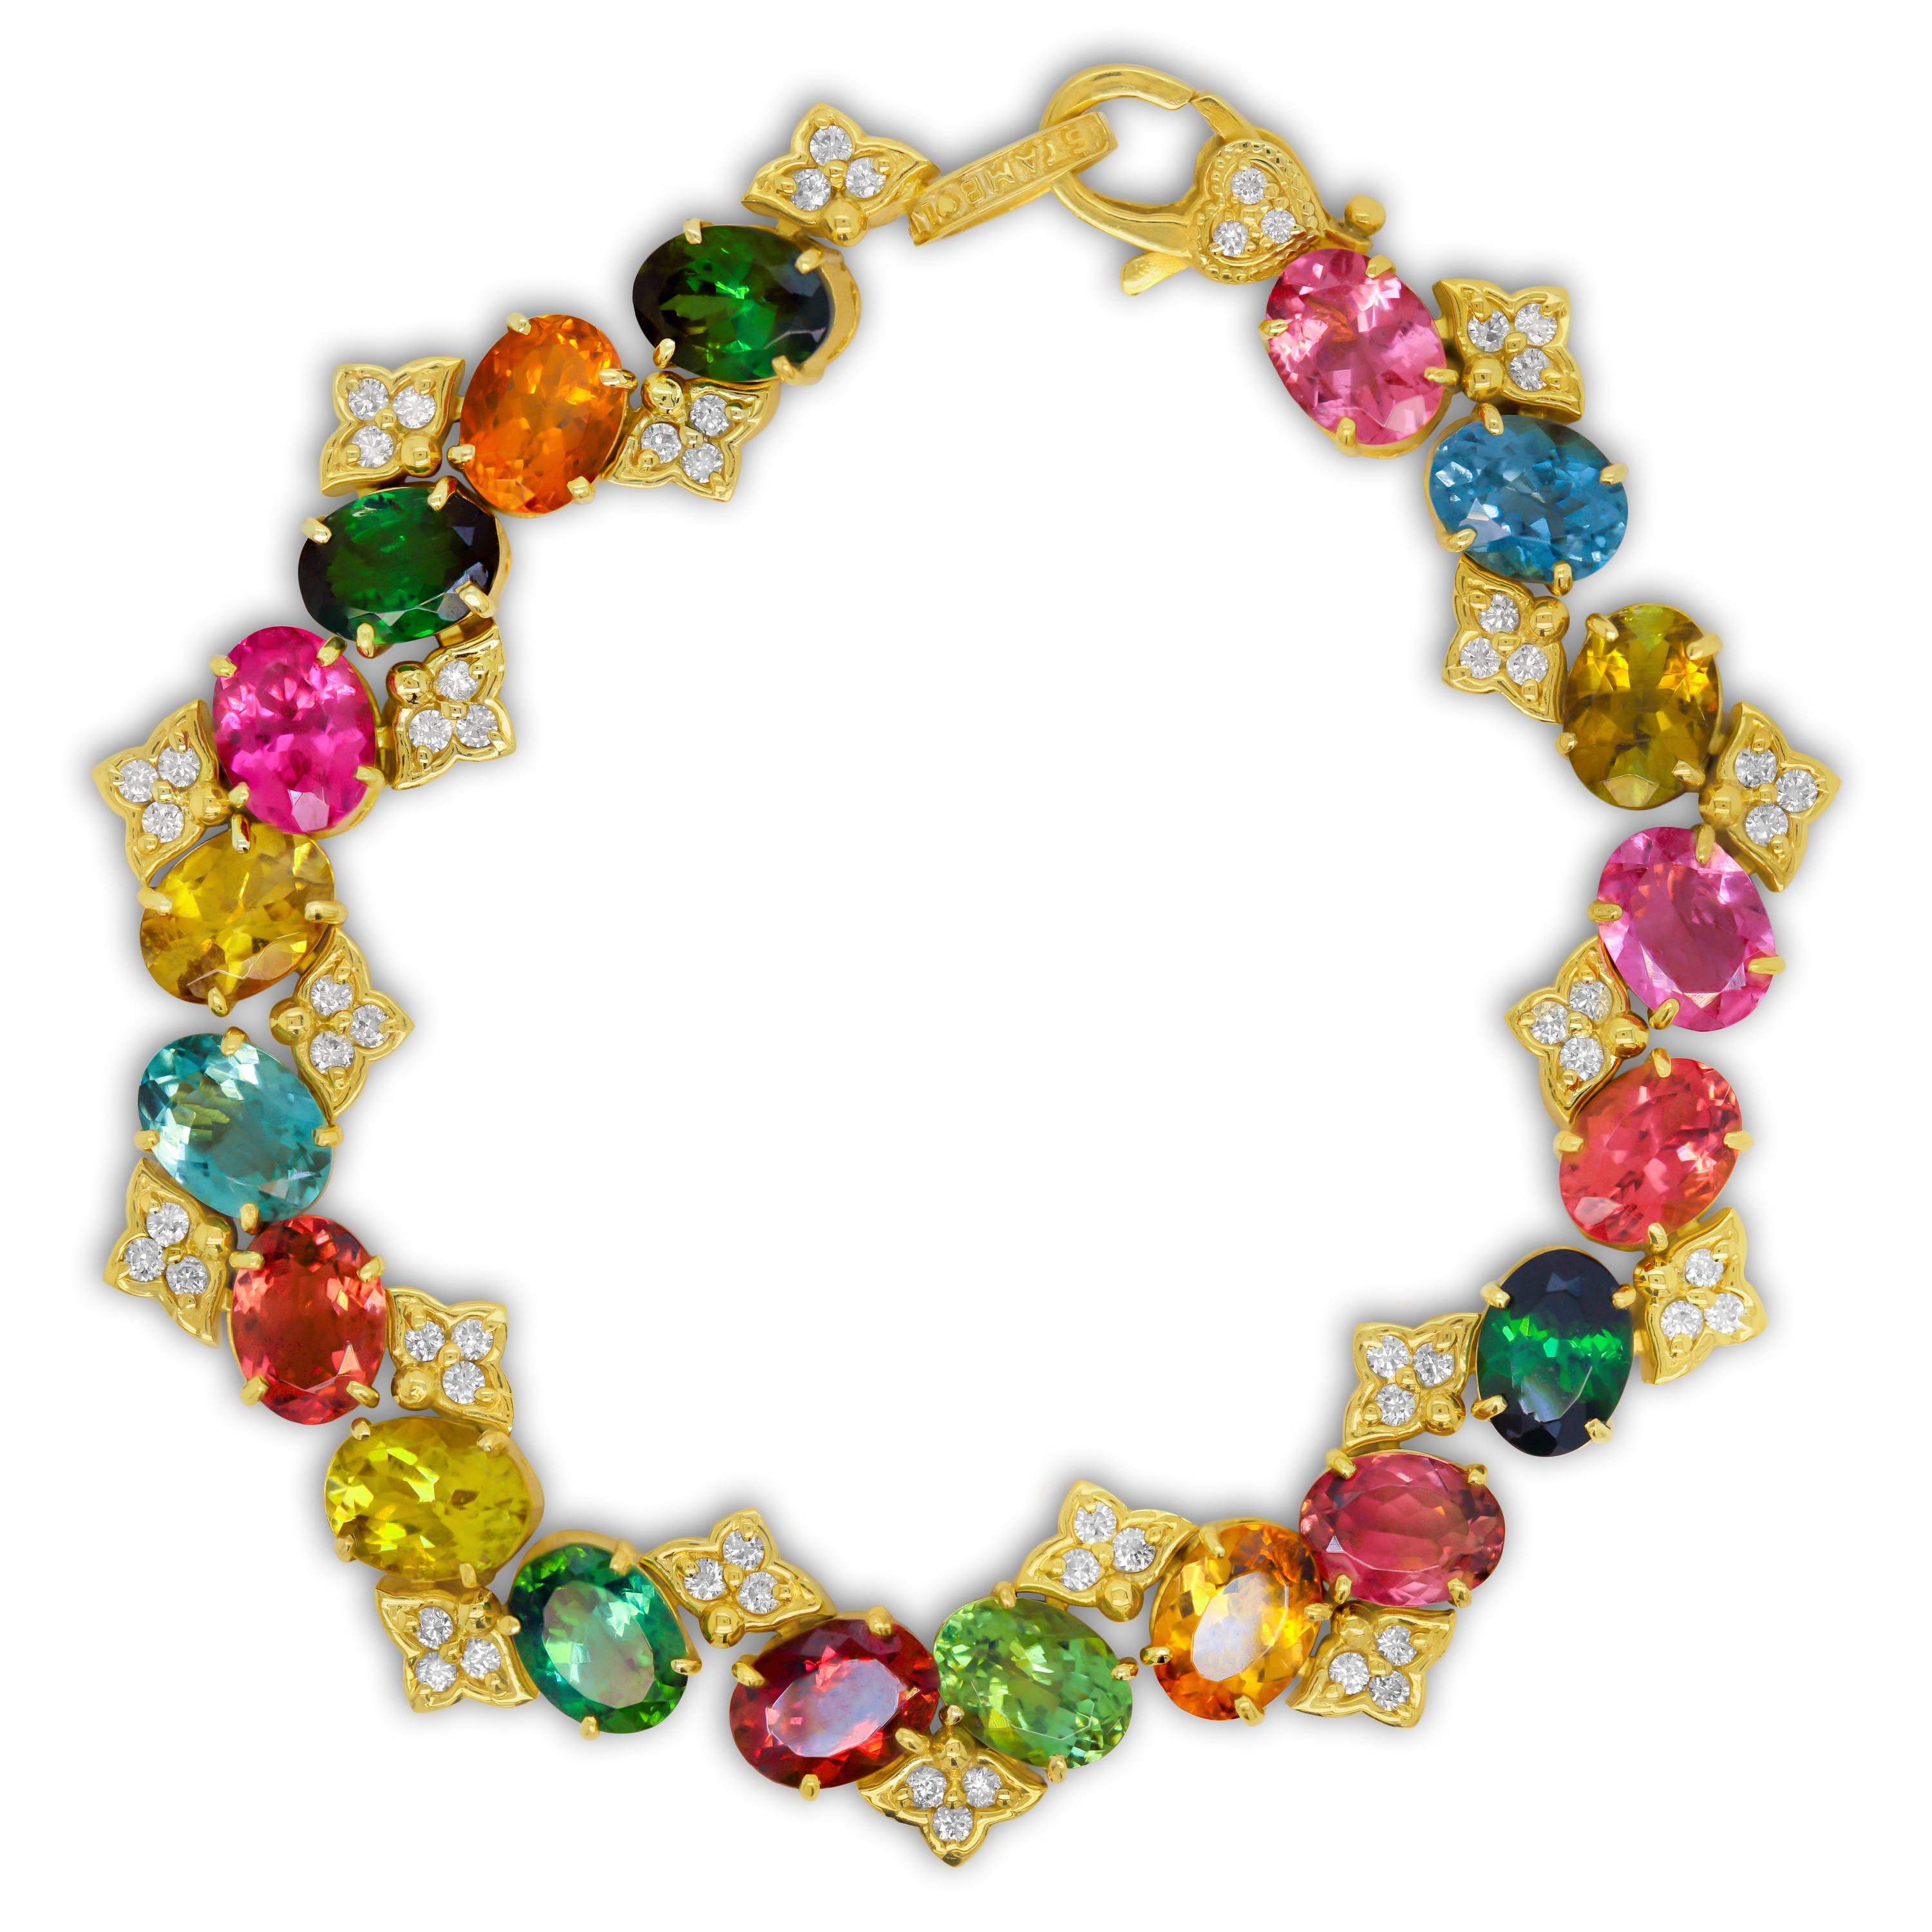 Stambolian 23.52 Carat Multi Color Tourmaline 18K Yellow Gold Diamonds Bracelet

This state-of-the-art, one-of-a-kind bracelet features nineteen oval, multi-color Tourmalines including bubble gum pink, indicolite blue, red, green yellow and orange.